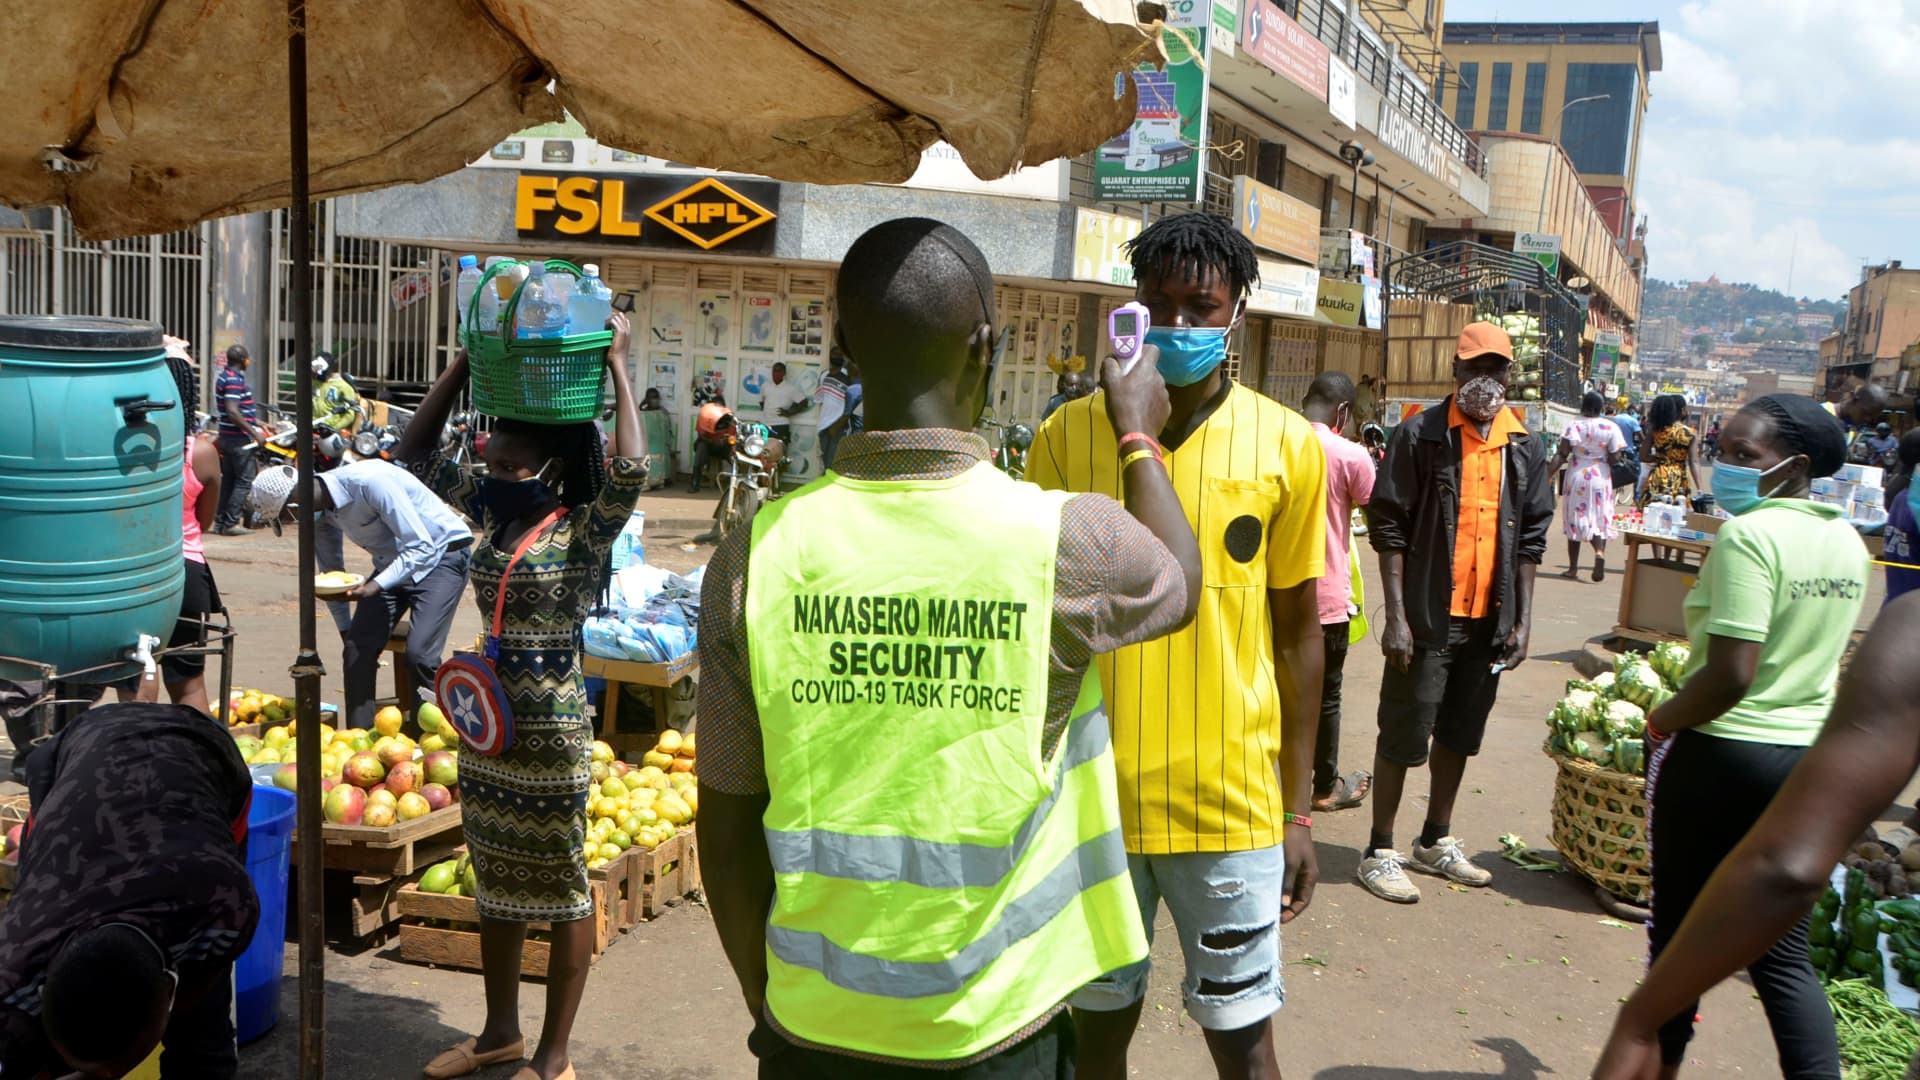 A security man measures a man's temperature at the entrance of a market in Kampala, Uganda, on June 20, 2021.